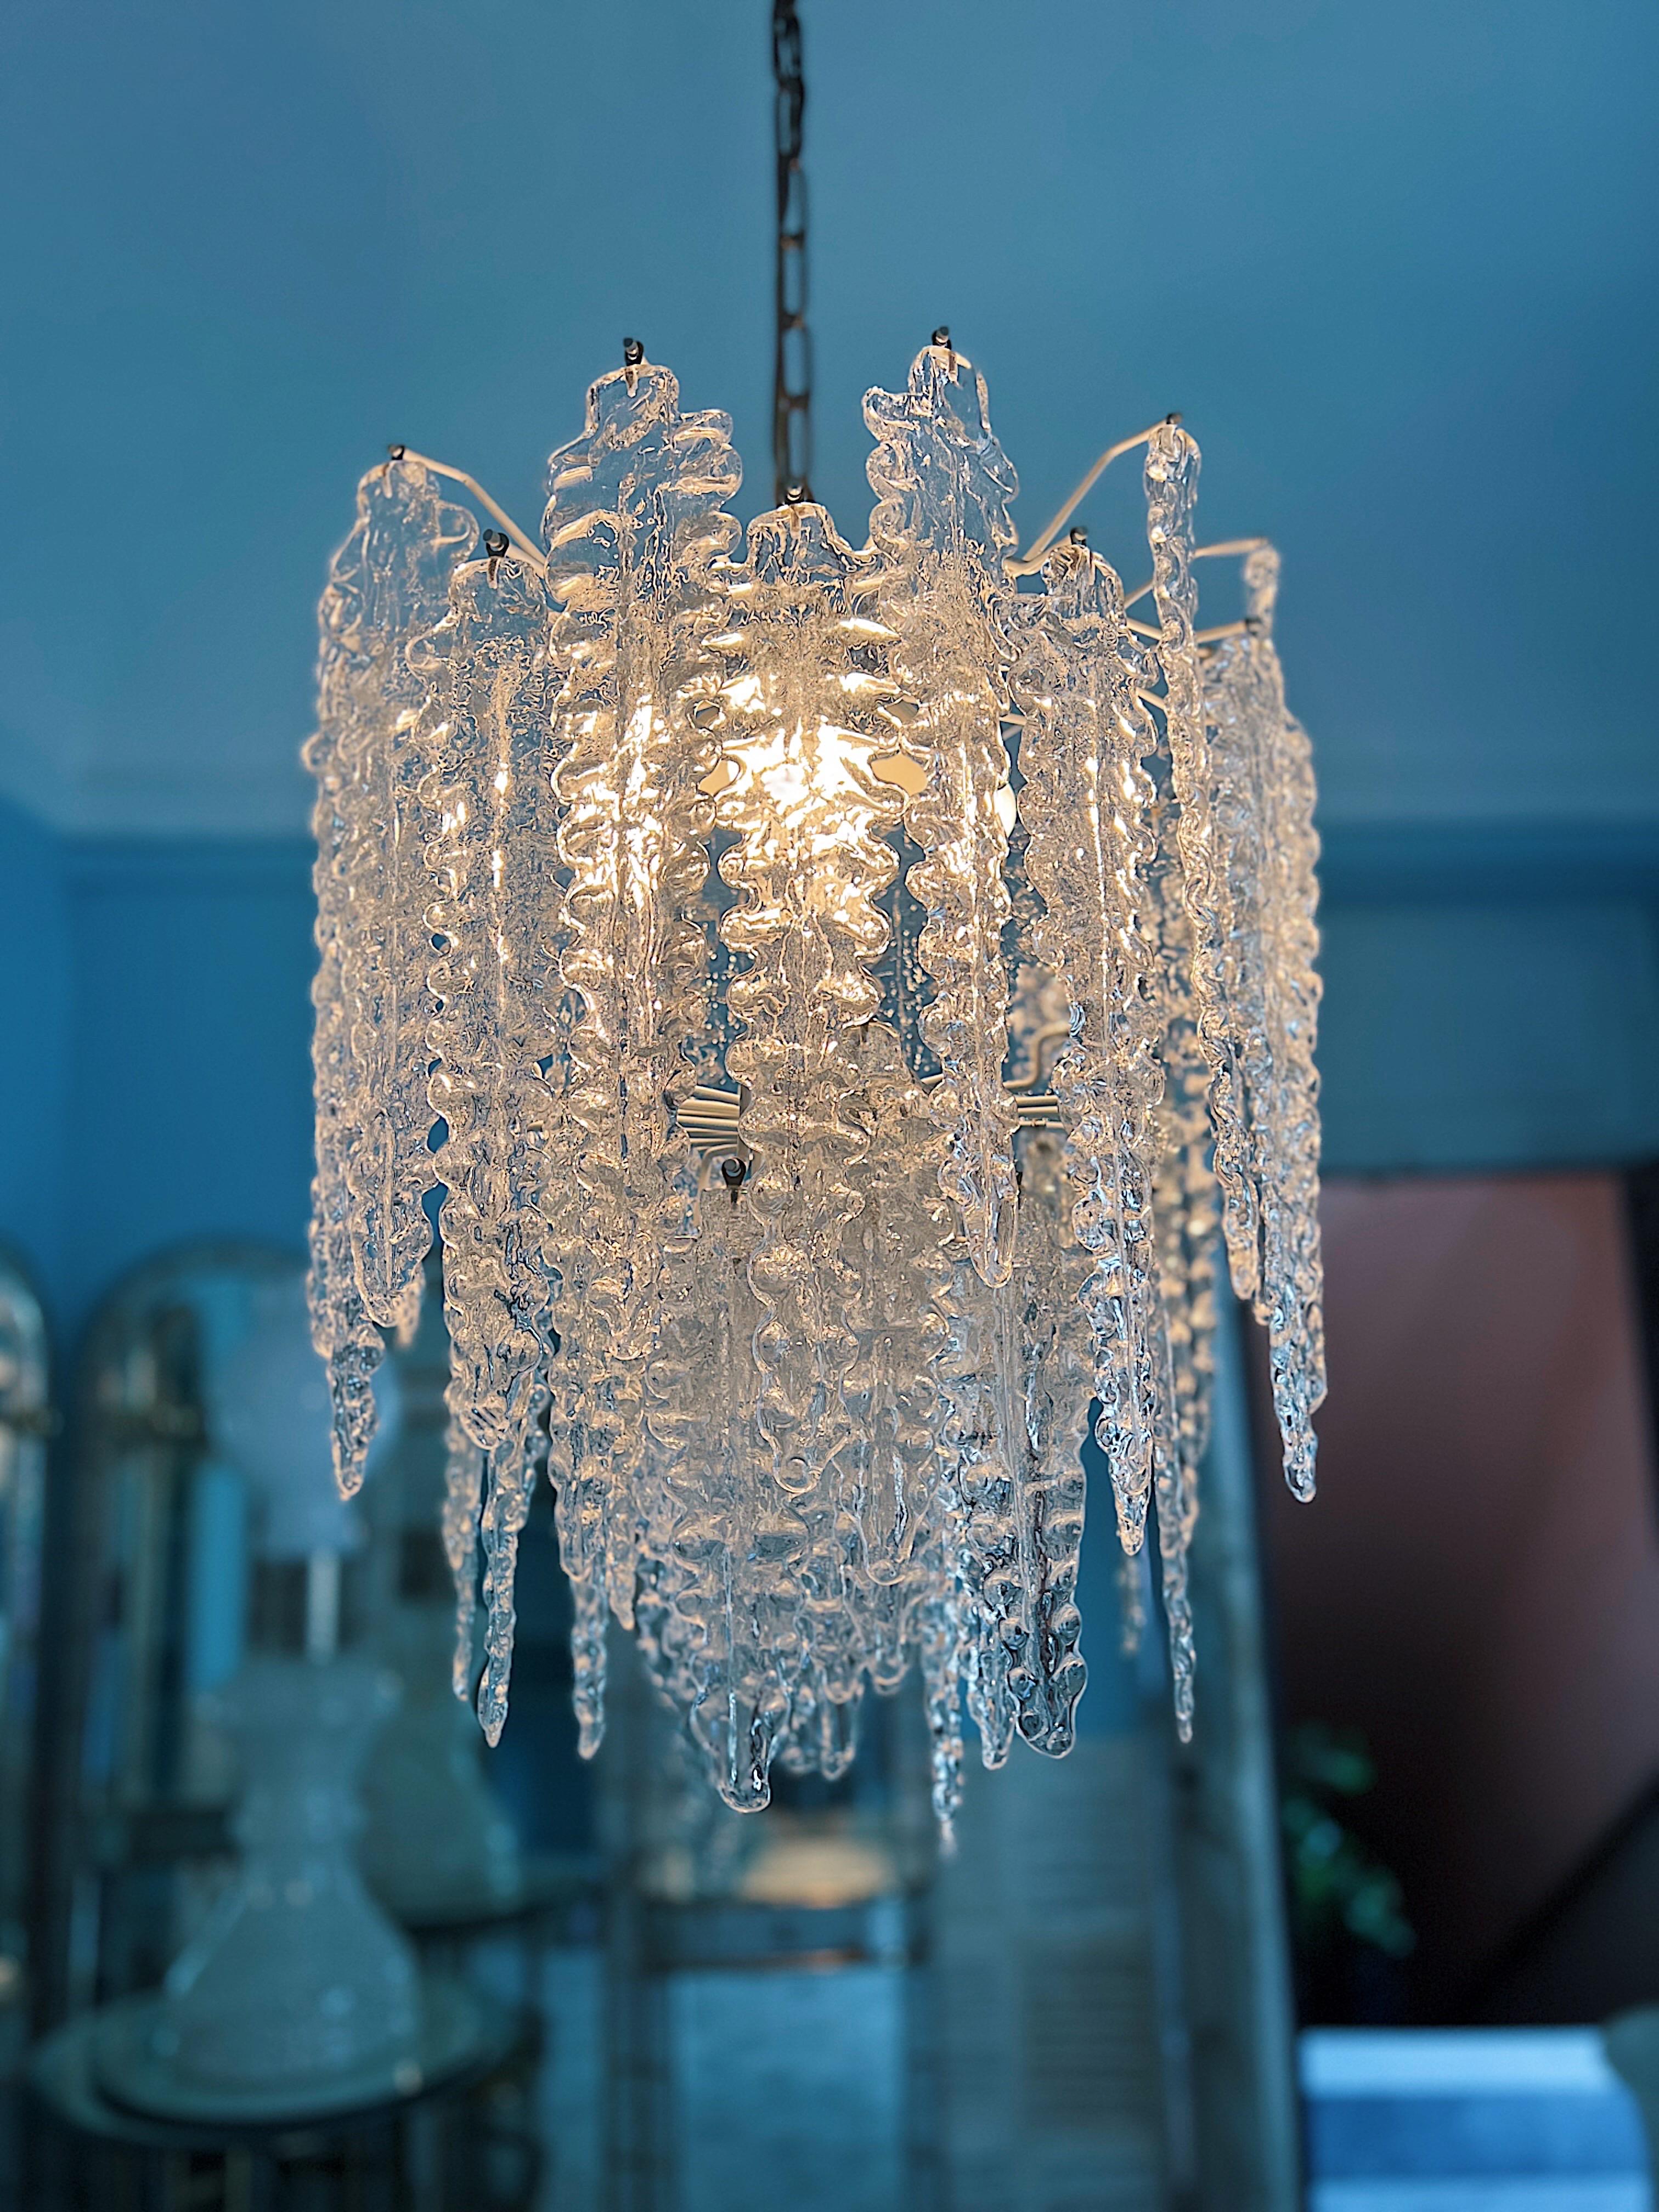 Metal Midcentury Chandelier by Venini, 1960s from the Alga Series For Sale